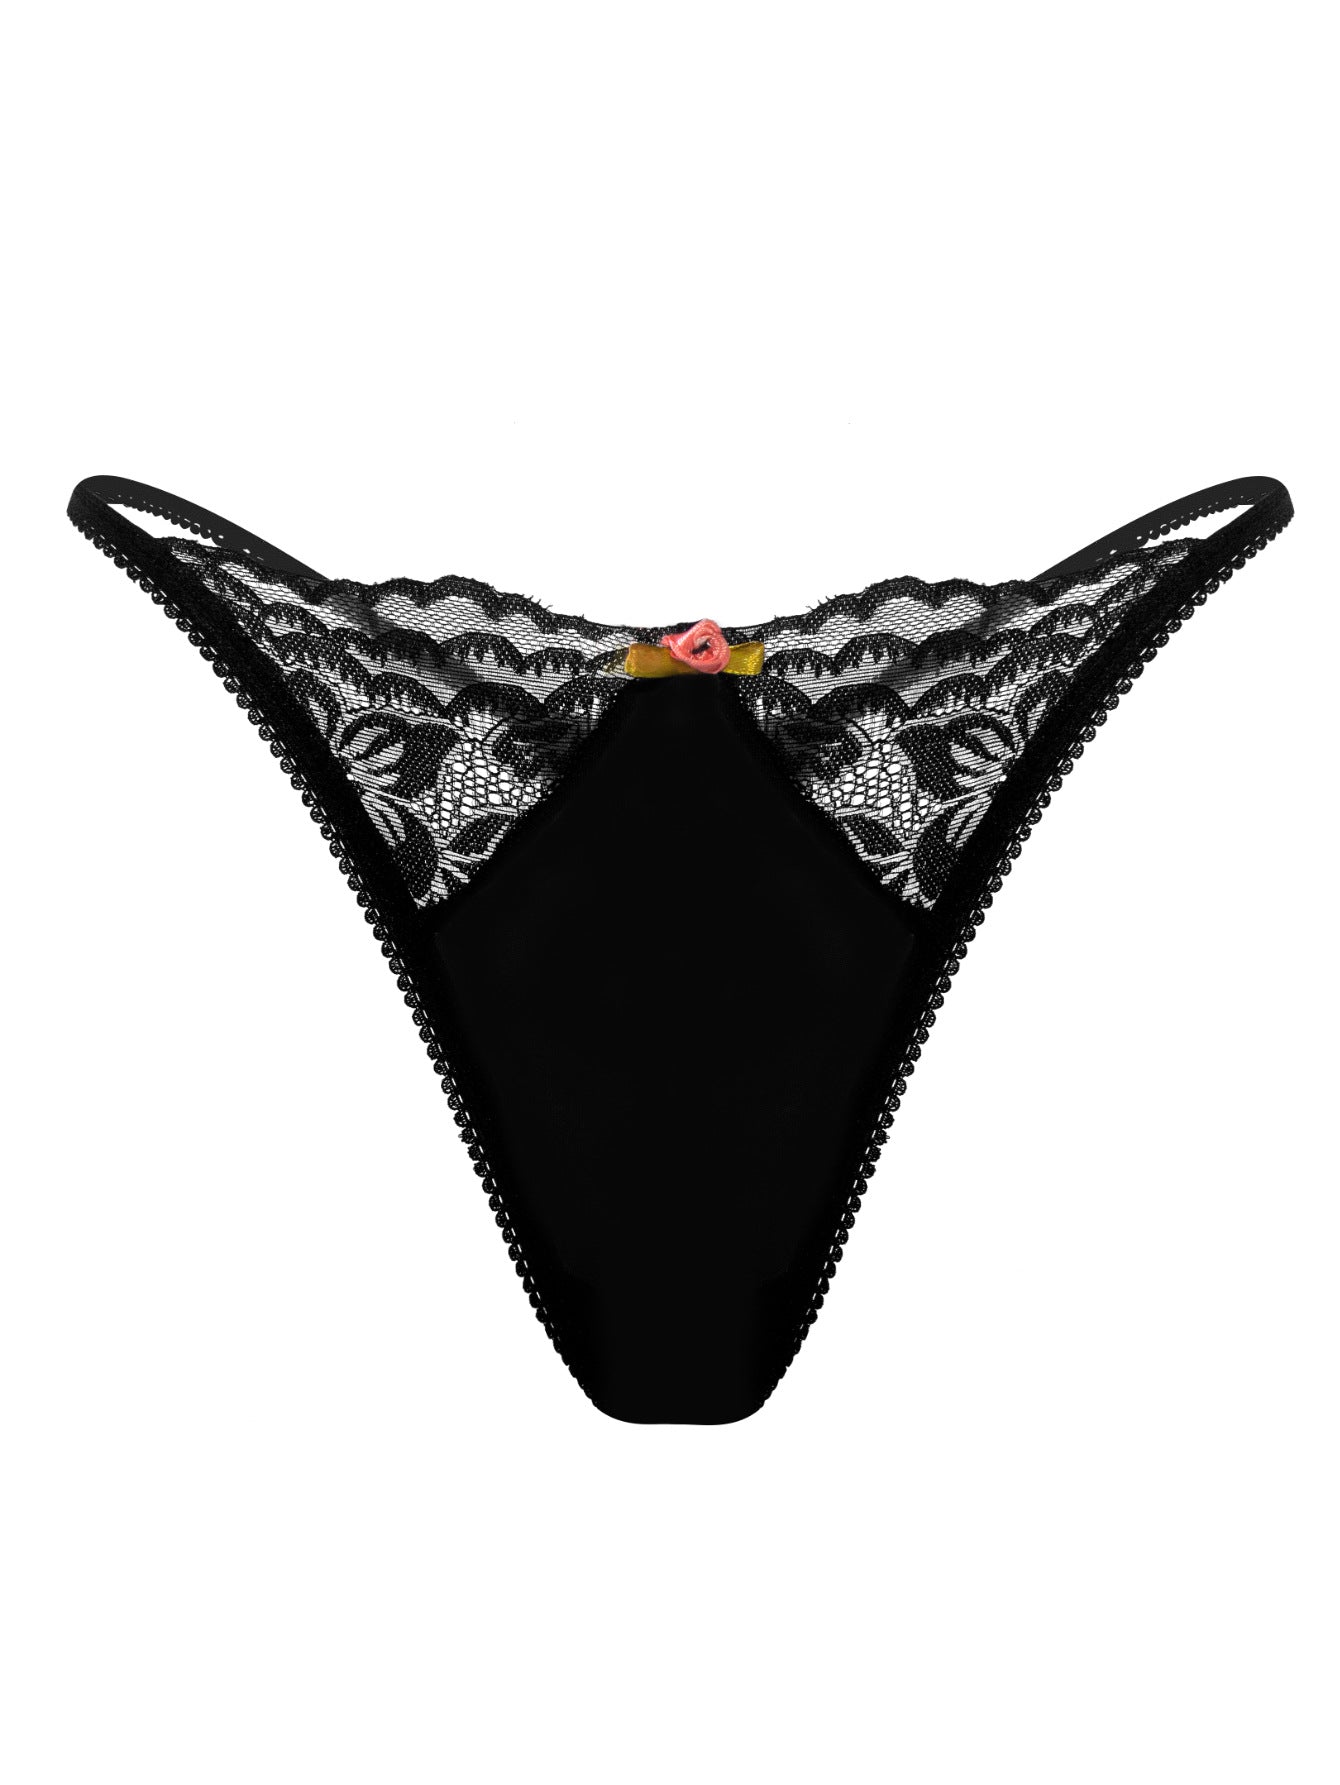 Curve Embrace Plus Size Thong: Classic Style with Lace Detailing